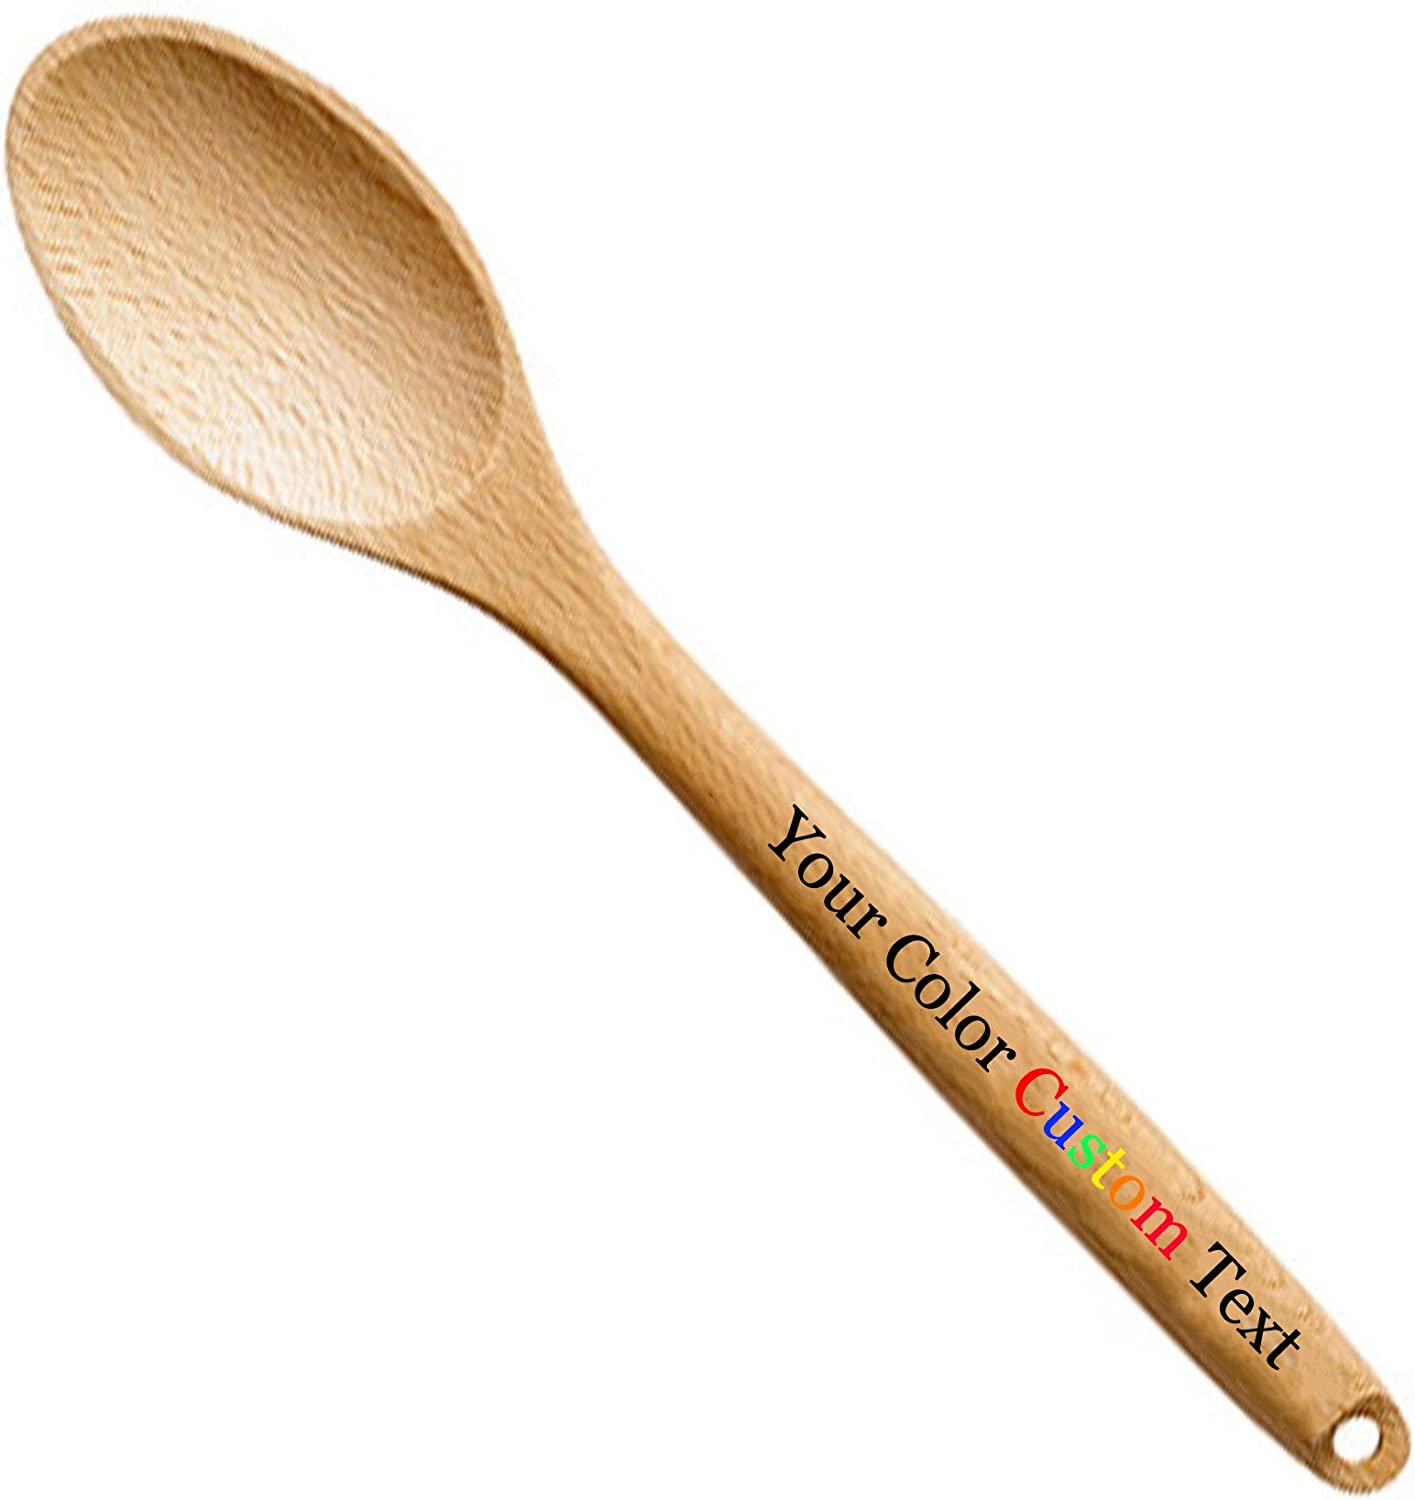 Customized Engraved OR Color Printed Wooden Spoons or Fork - Add Your Text - Available in 2 and 3 piece sets!